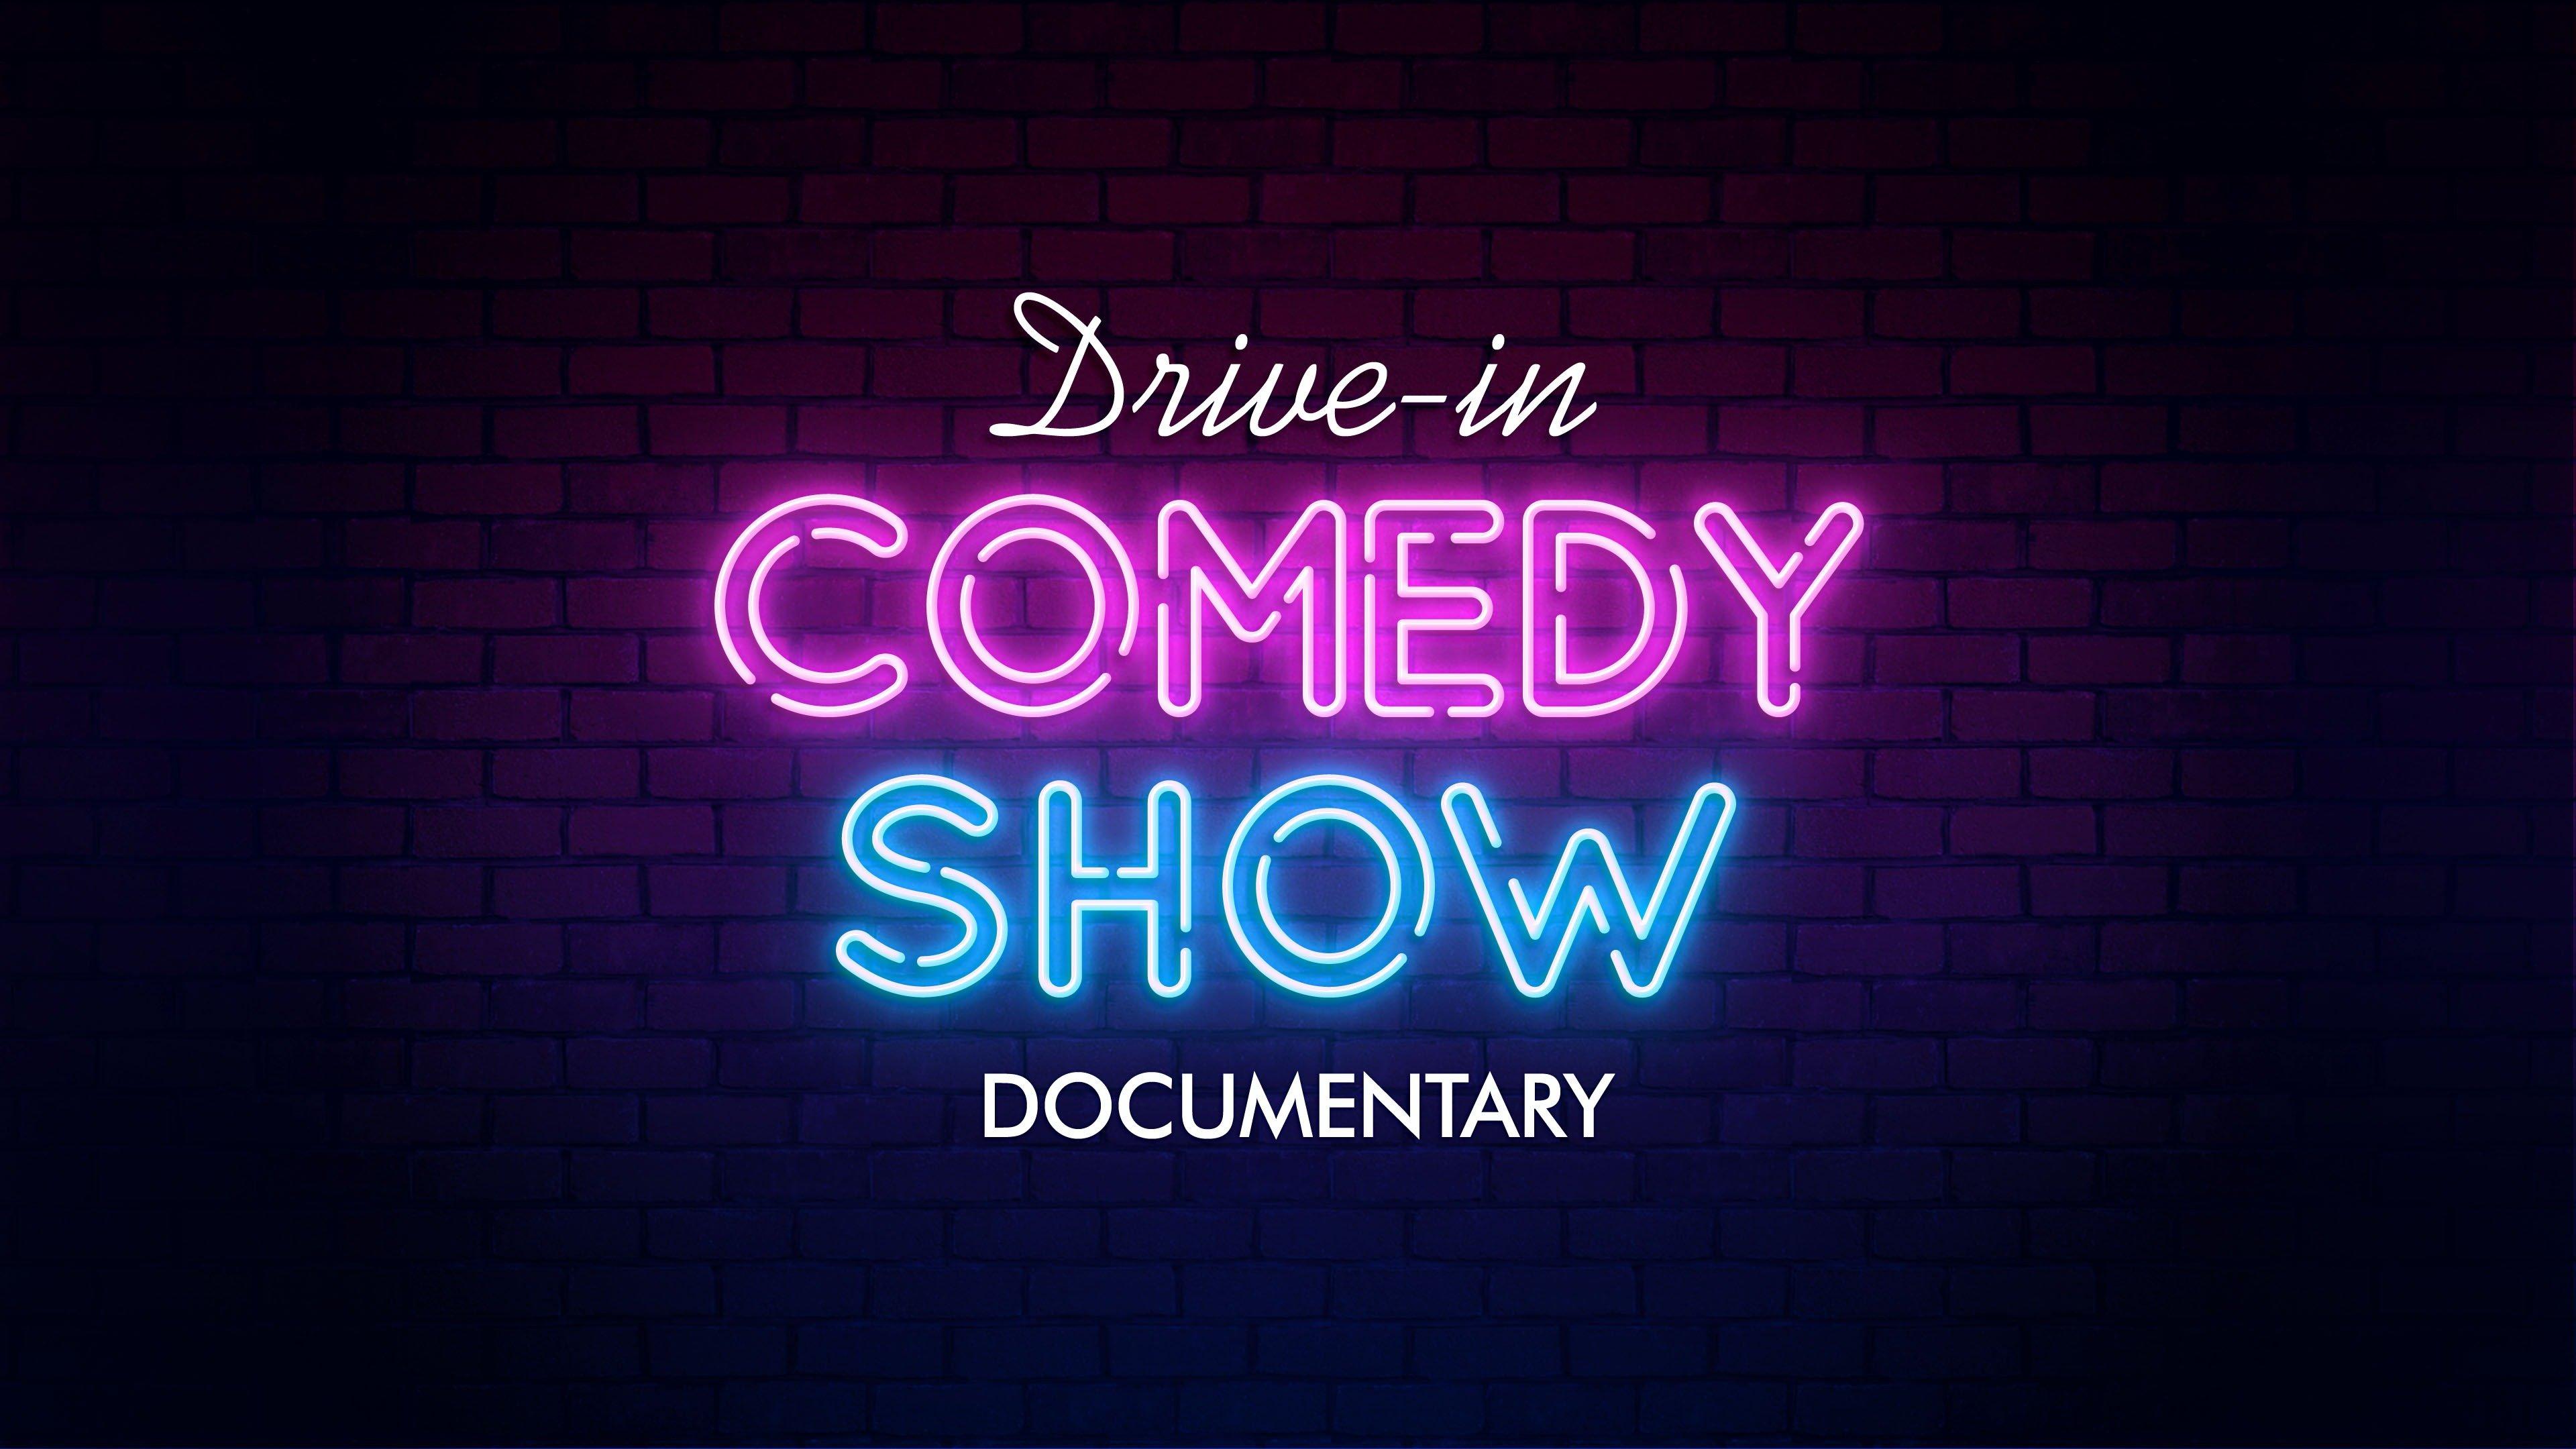 Watch DriveIn Comedy Documentary Streaming Online on Philo (Free Trial)